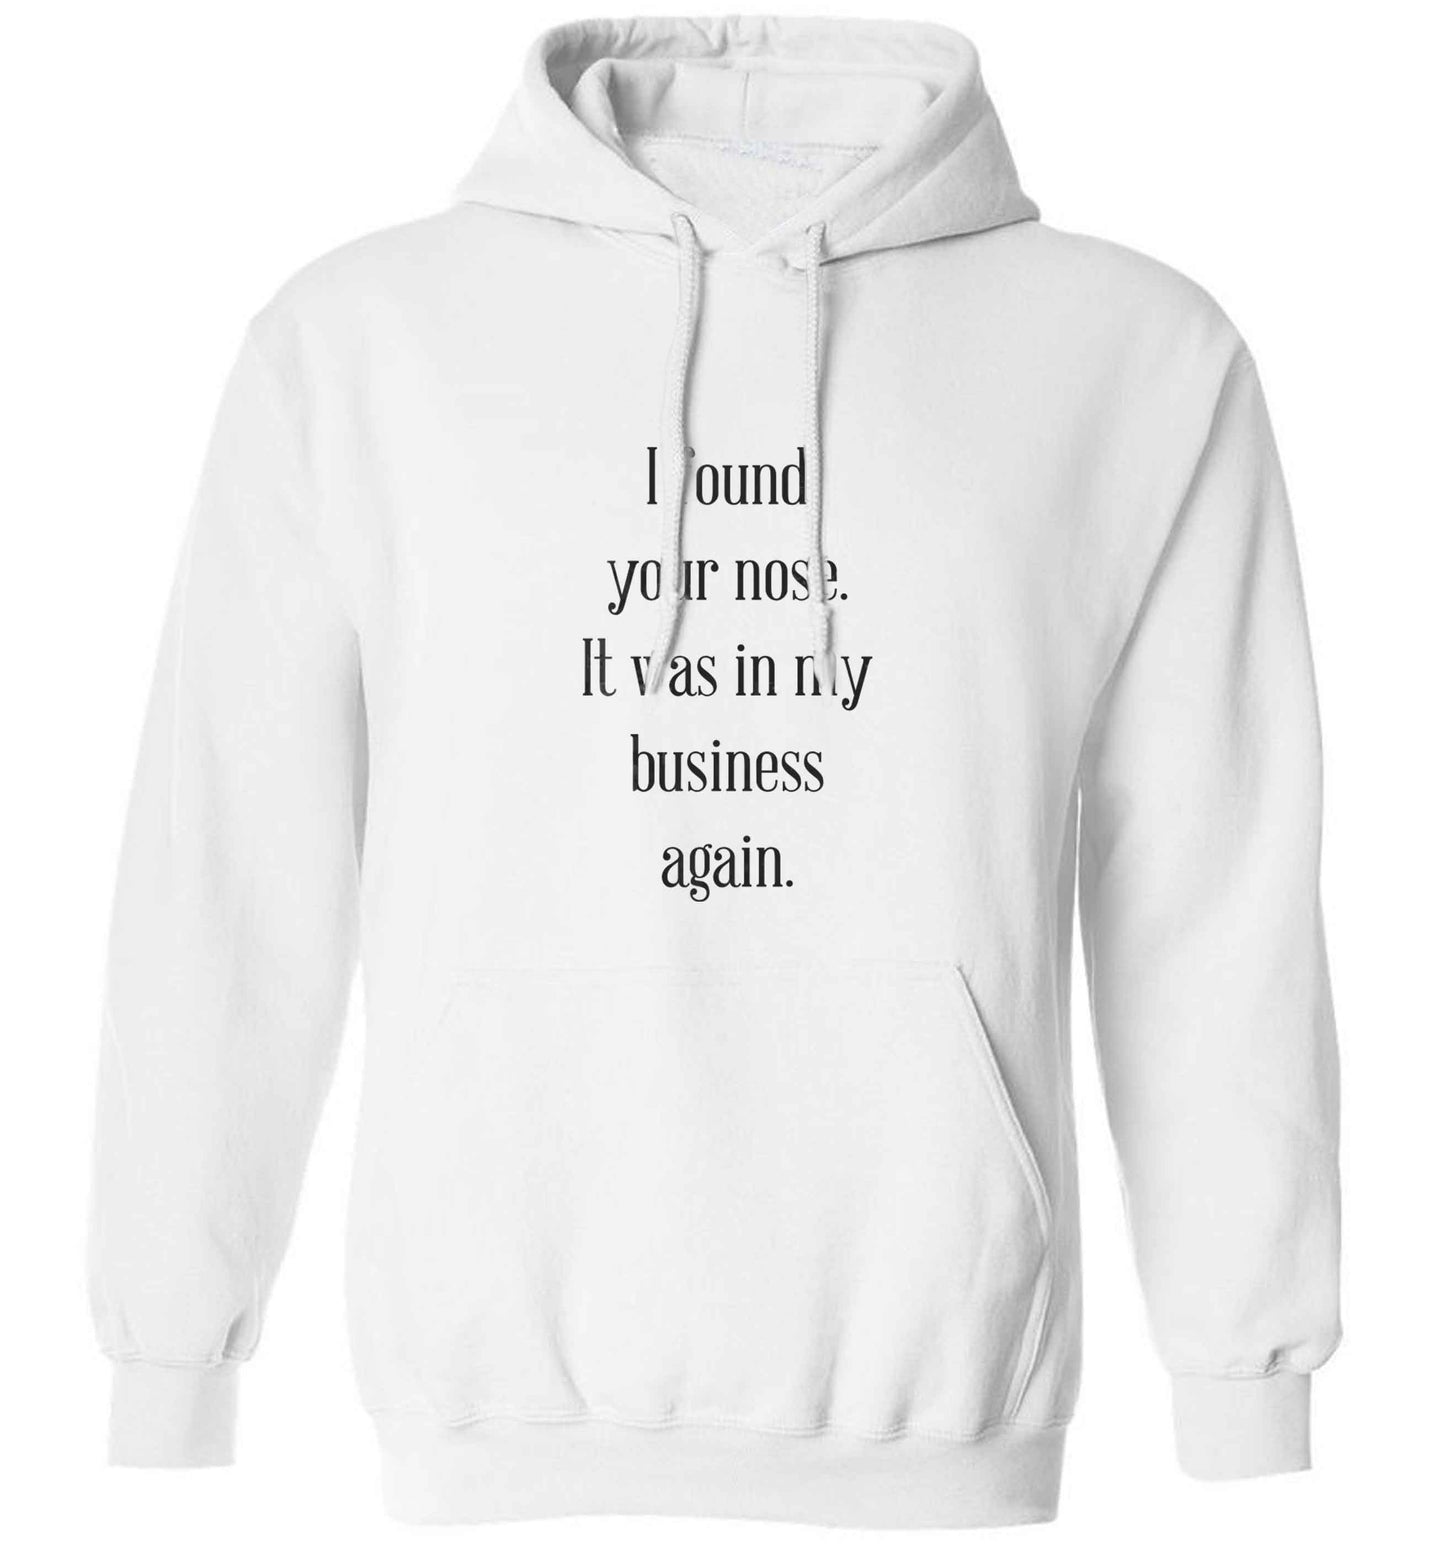 I found your nose it was in my business again adults unisex white hoodie 2XL